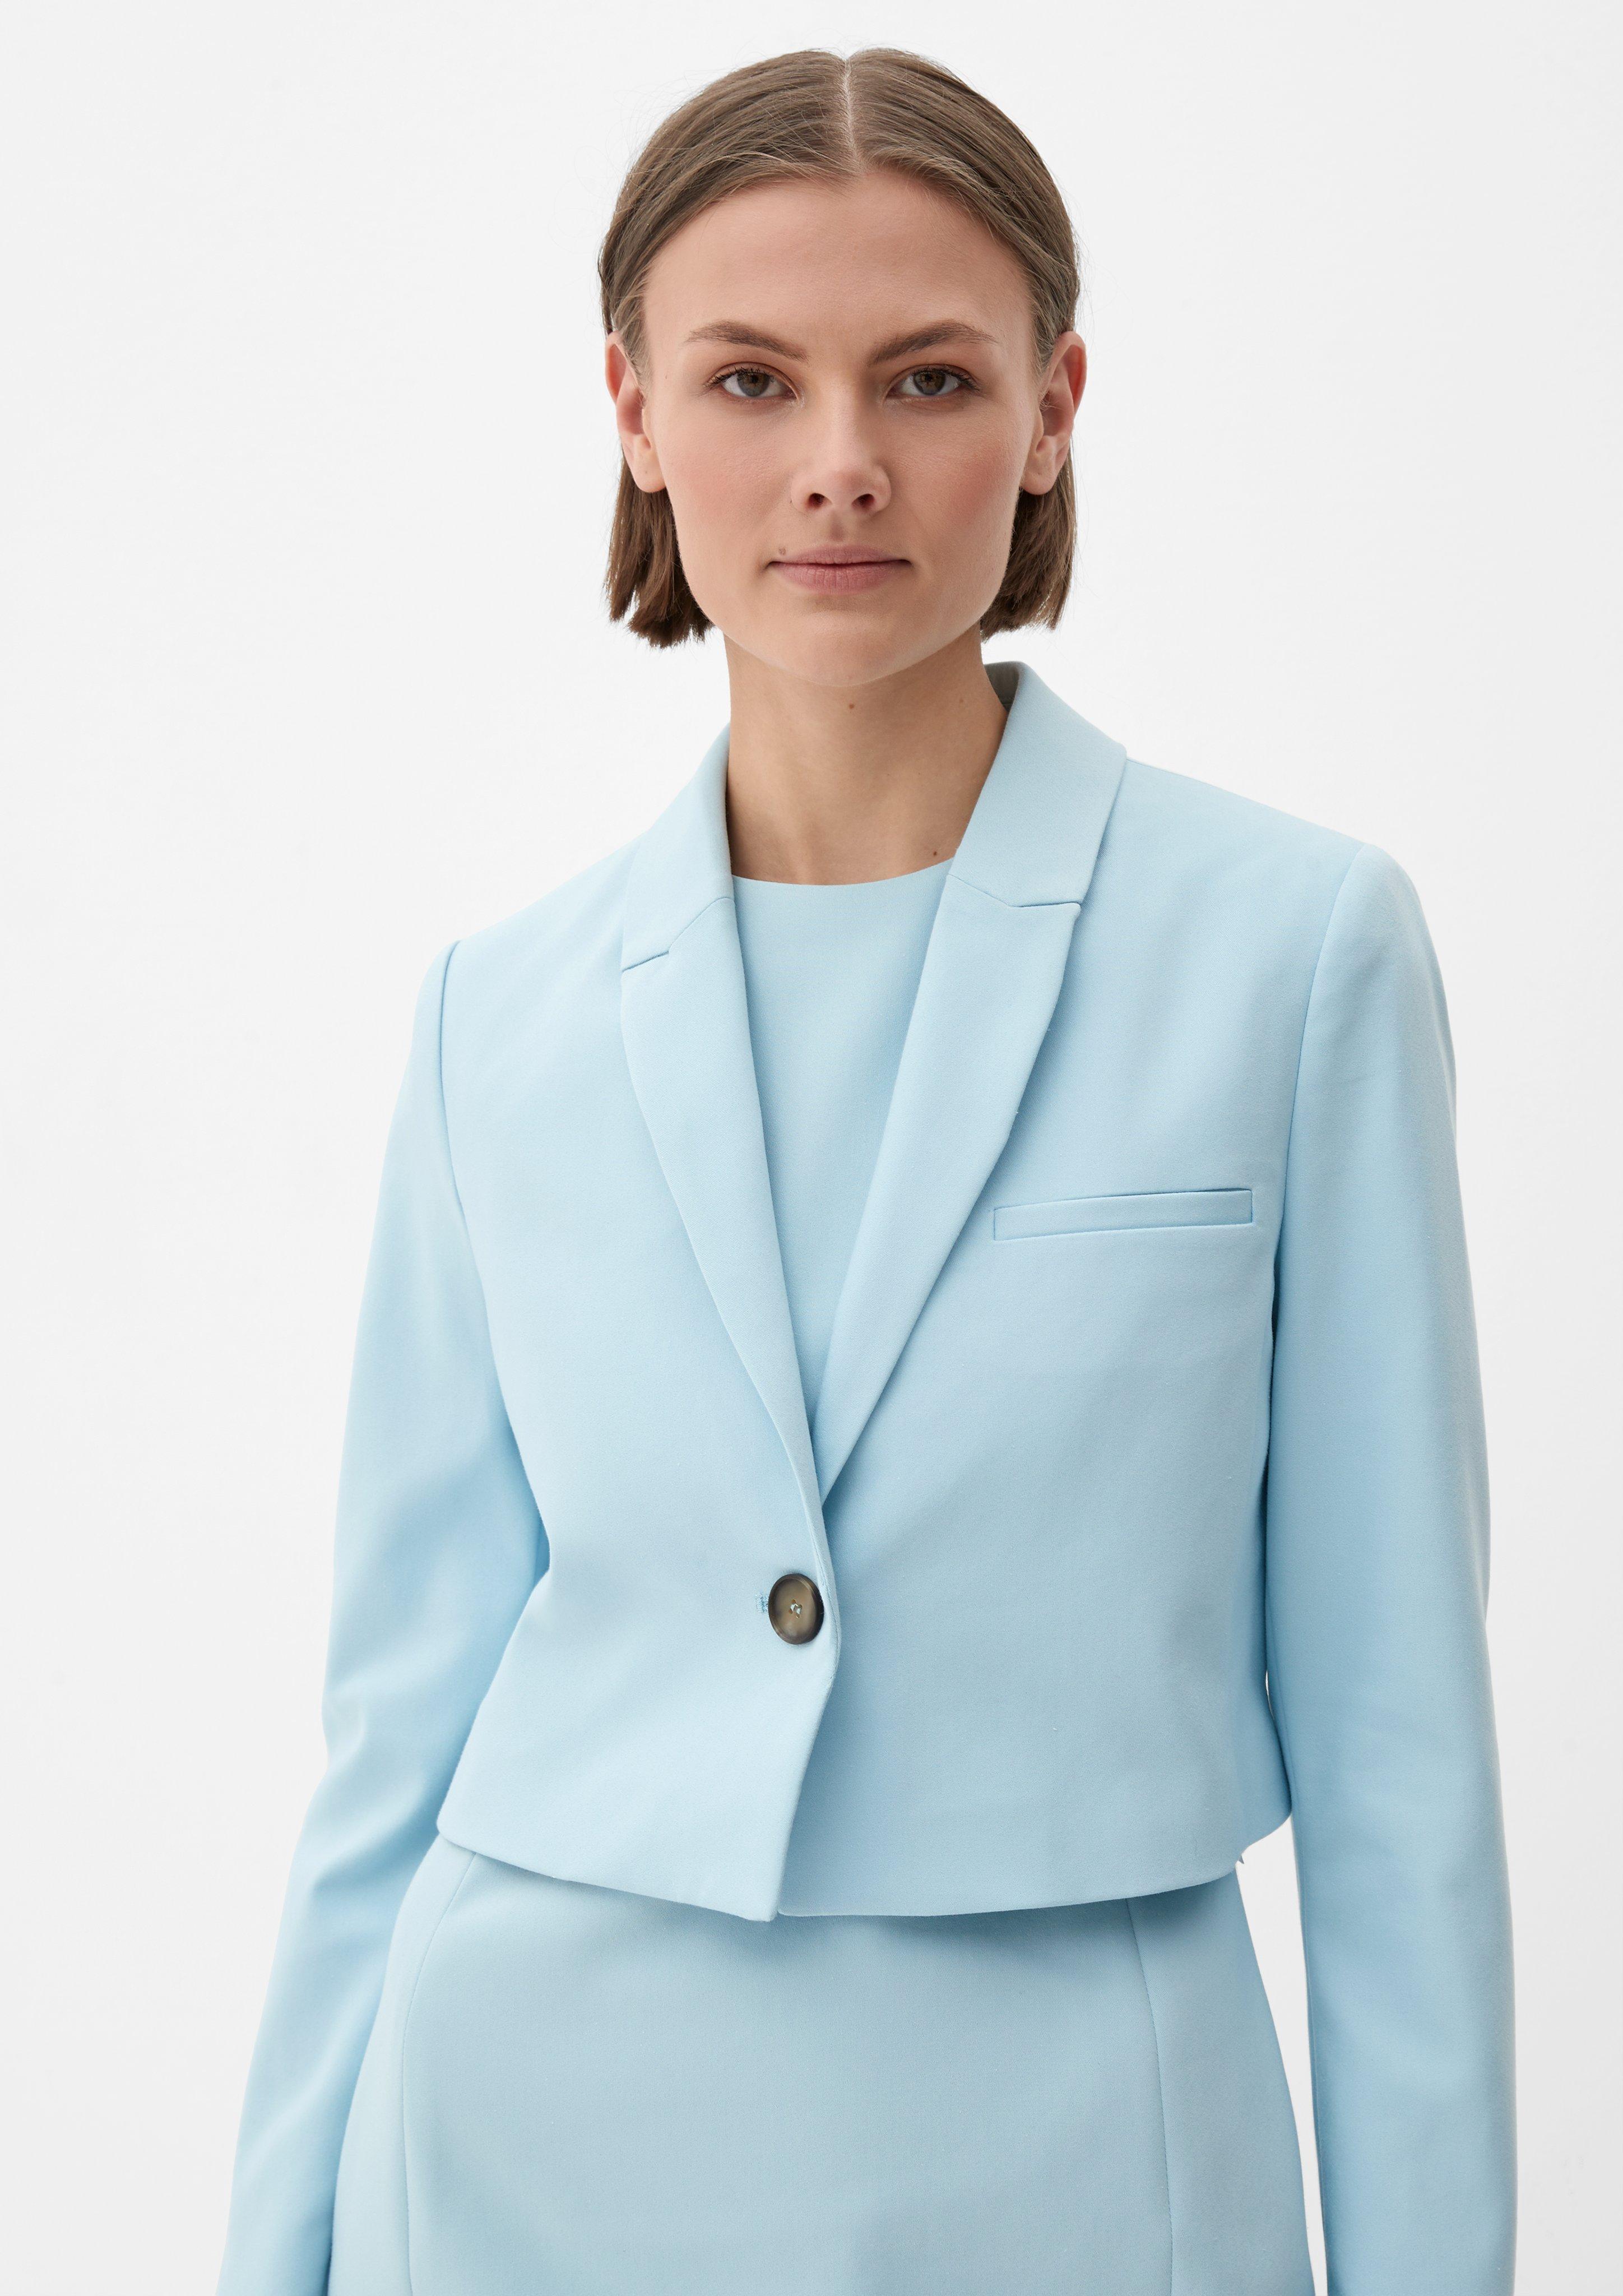 Woven fabric jacket - arctic blue | s.Oliver